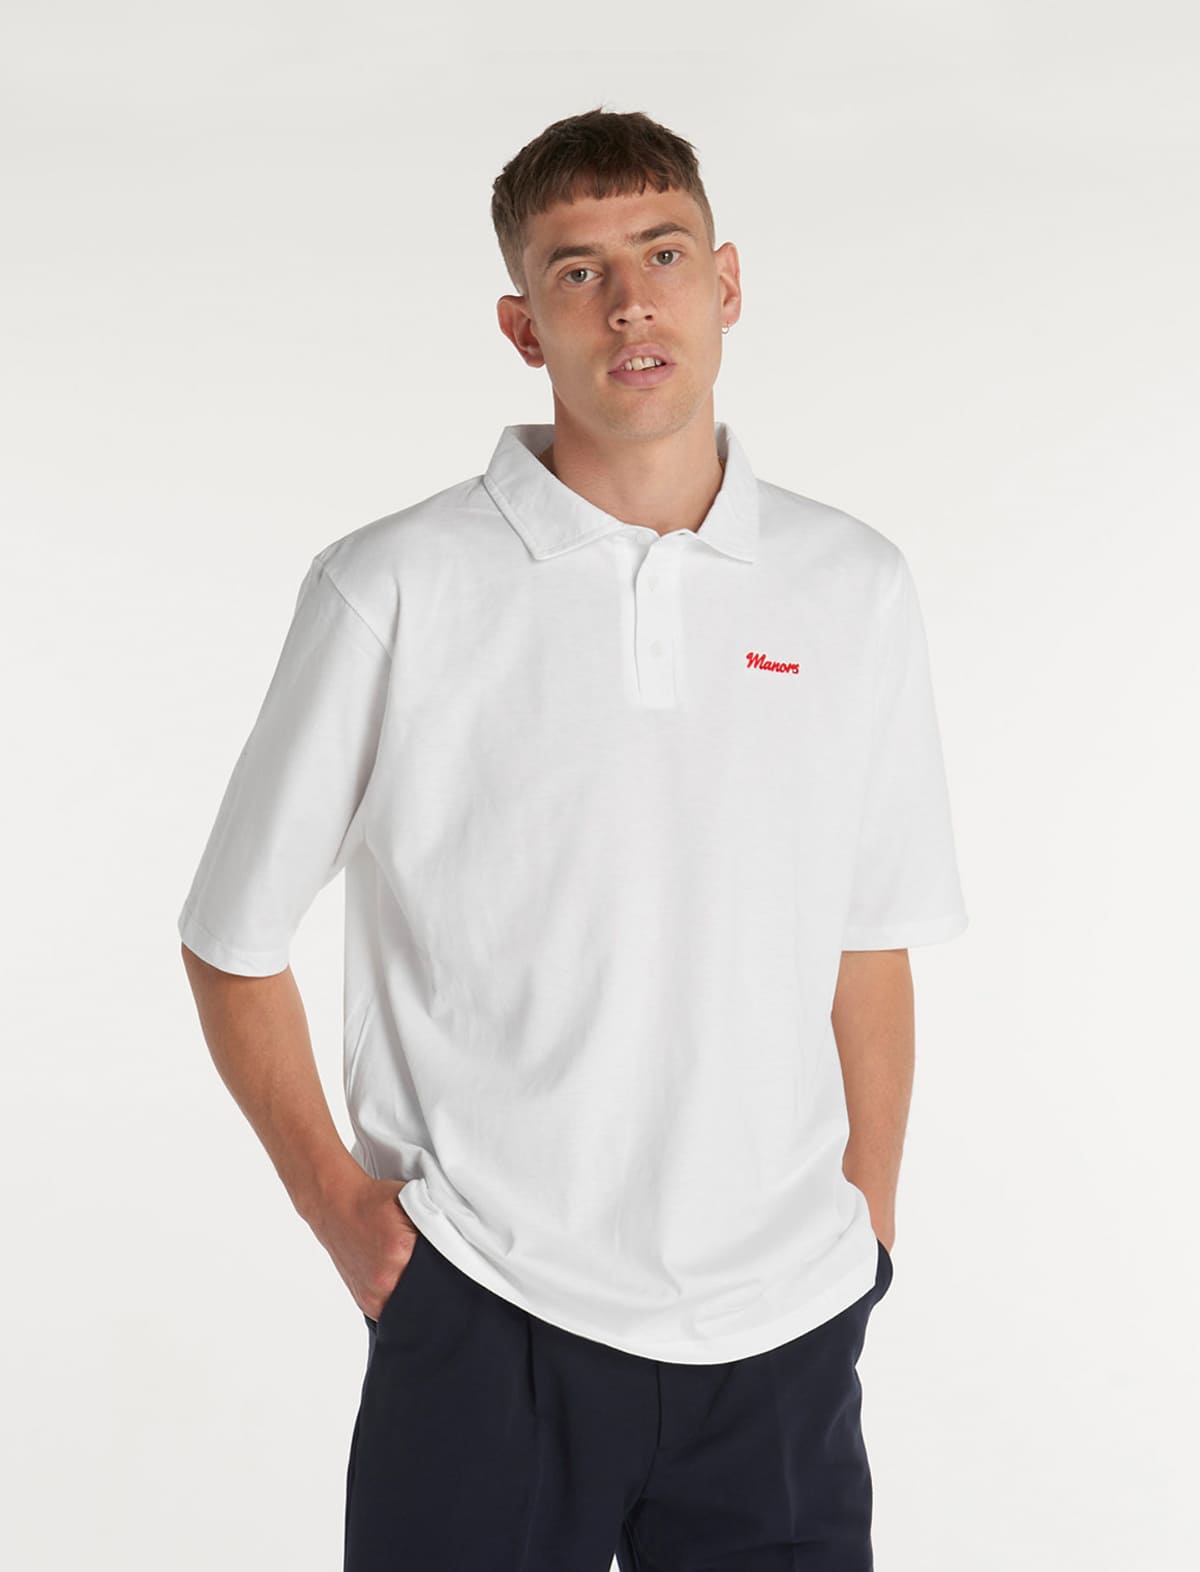 MANORS GOLF Classic Polo Shirt in White